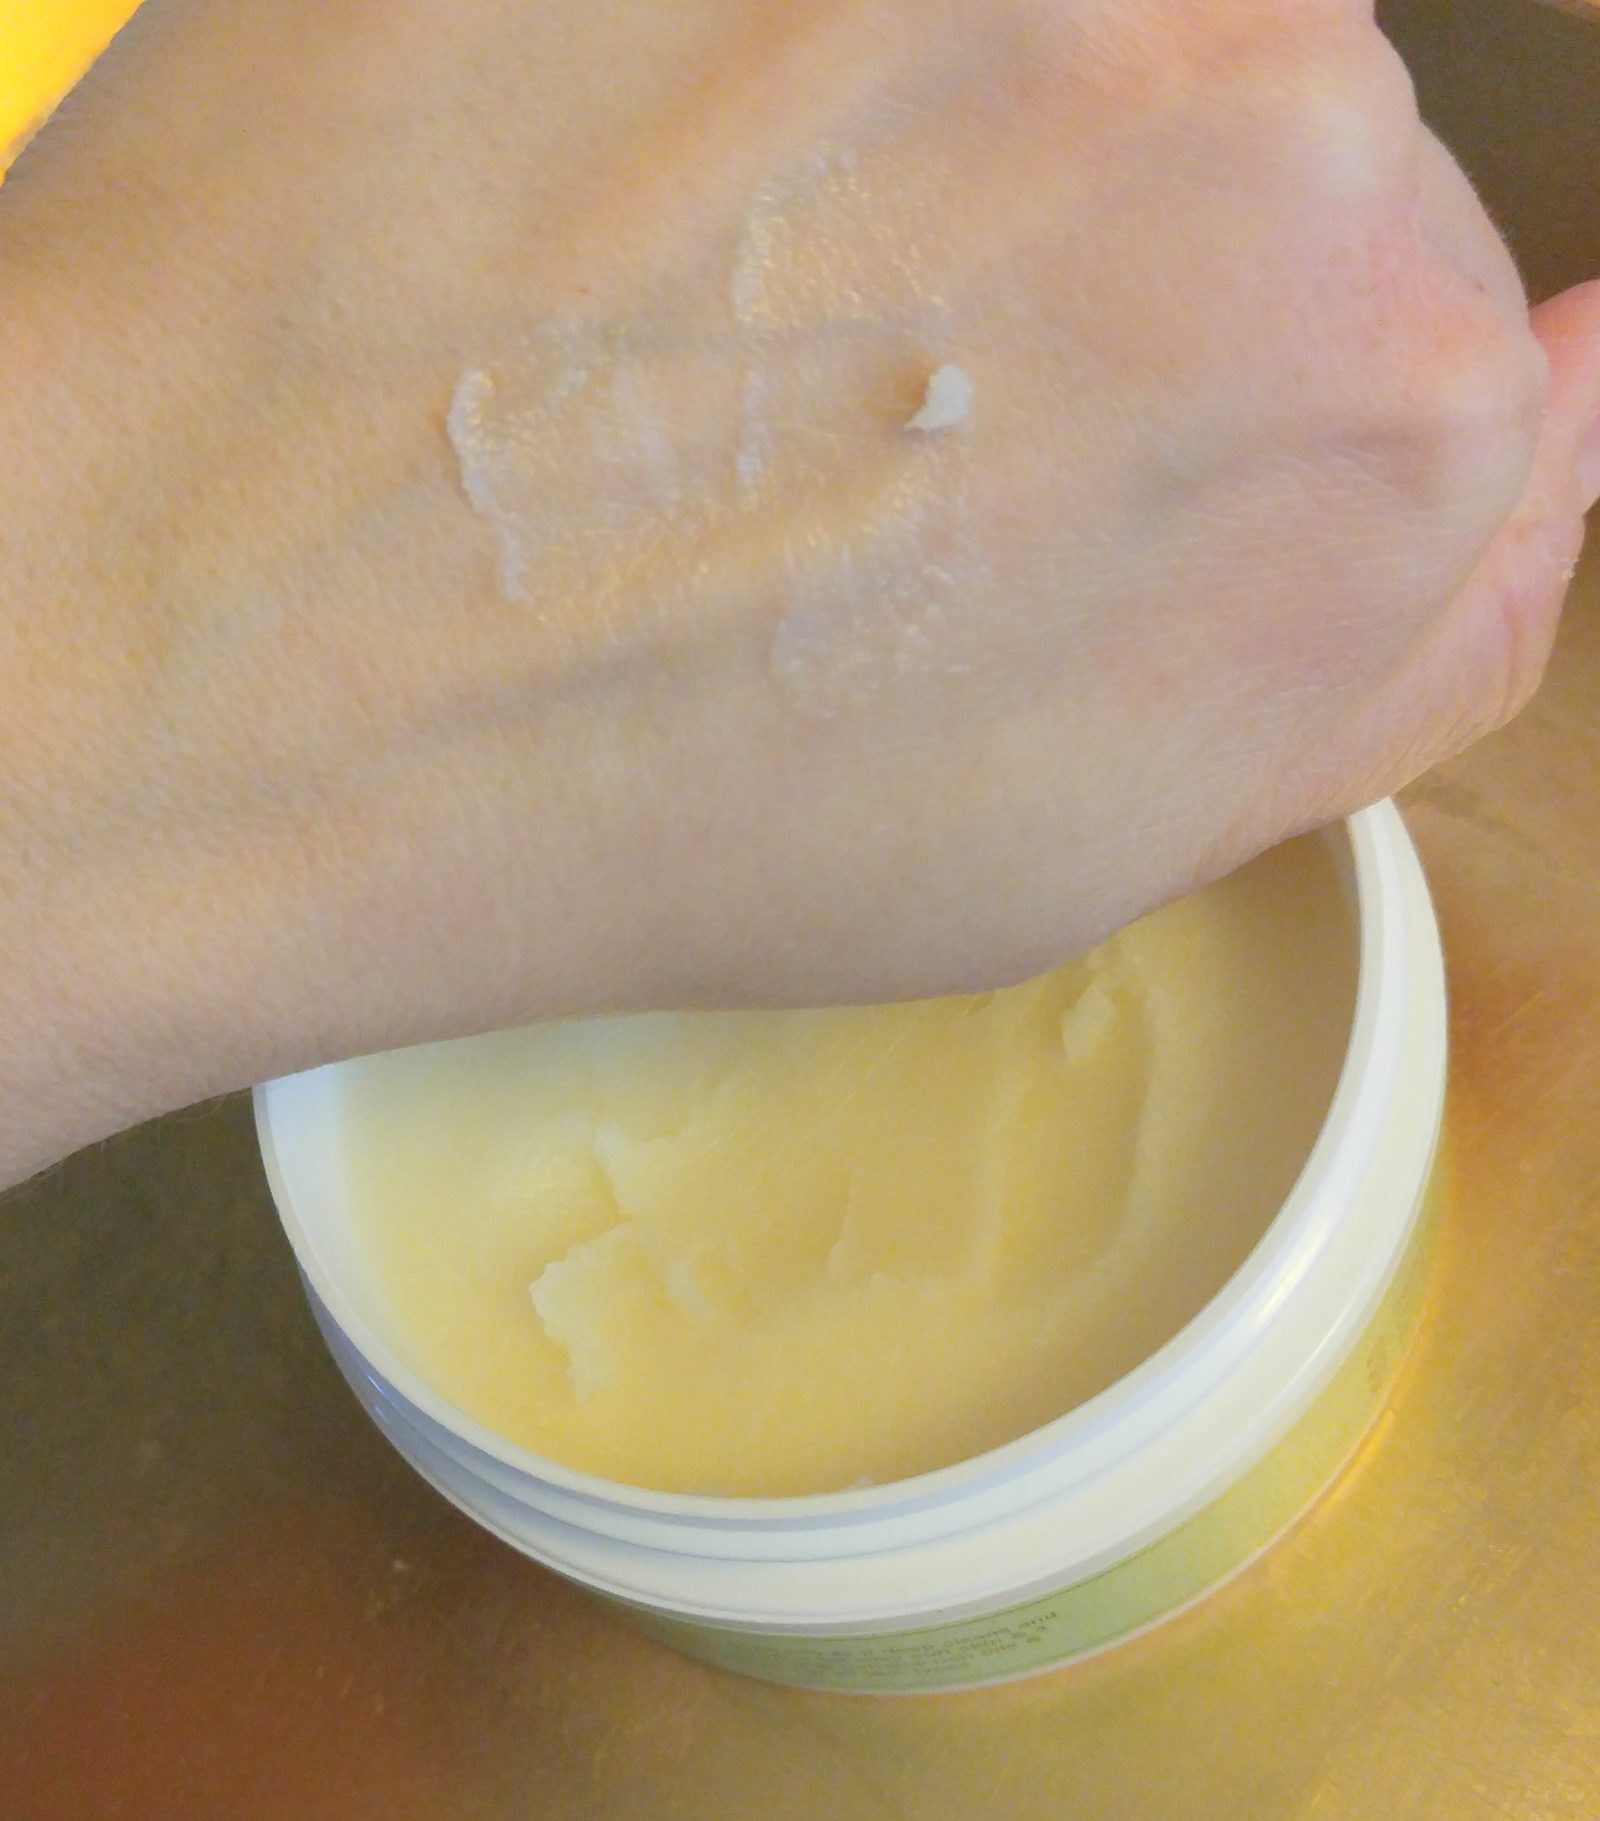 How to Use Pixi Cleansing Balm